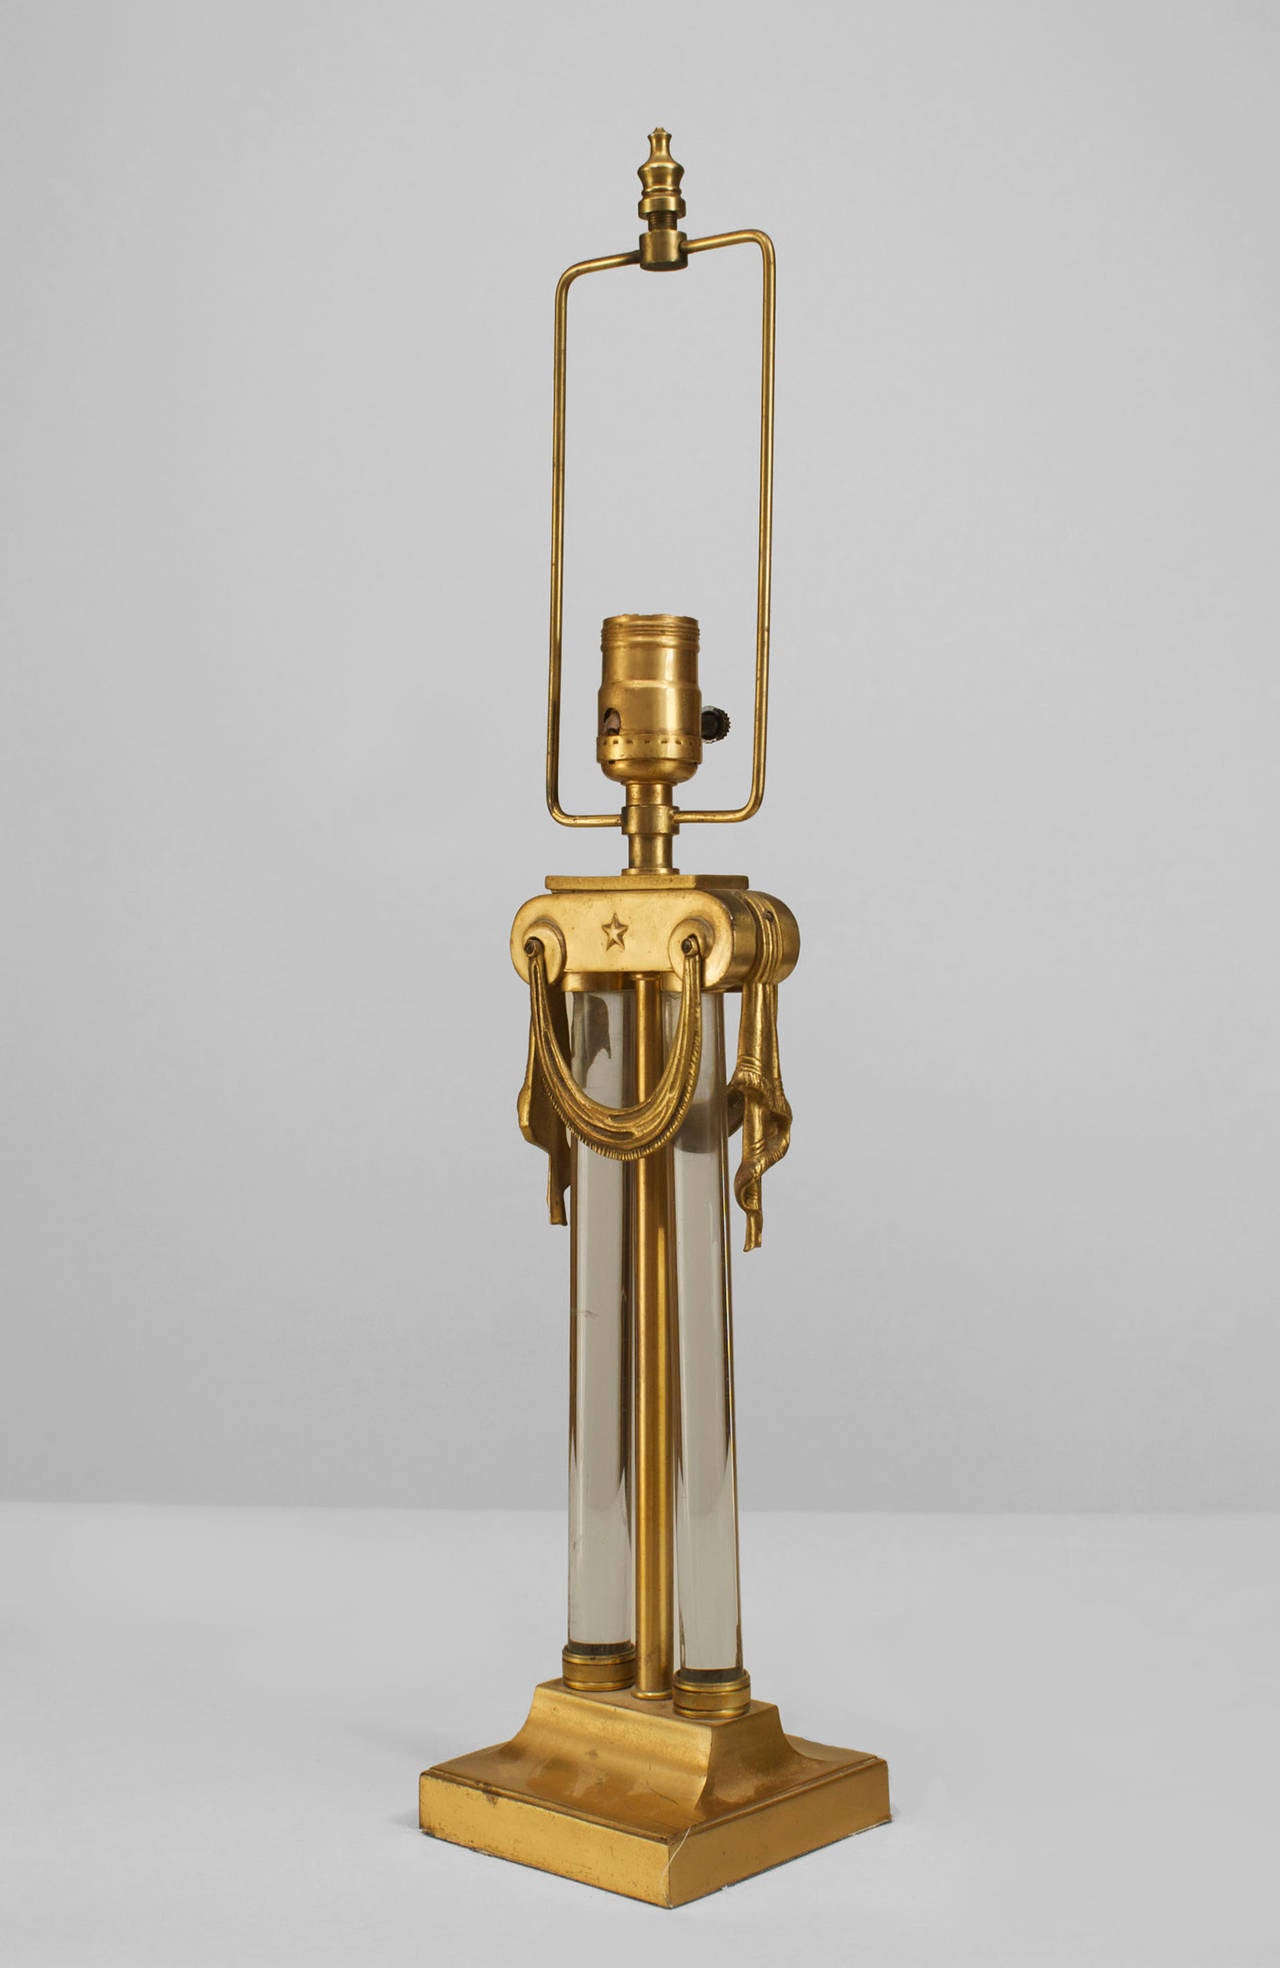 Pair of American Art Moderne brass & glass table lamps with swag hung capital above Paired glass cylinders (PRICED AS Pair).
